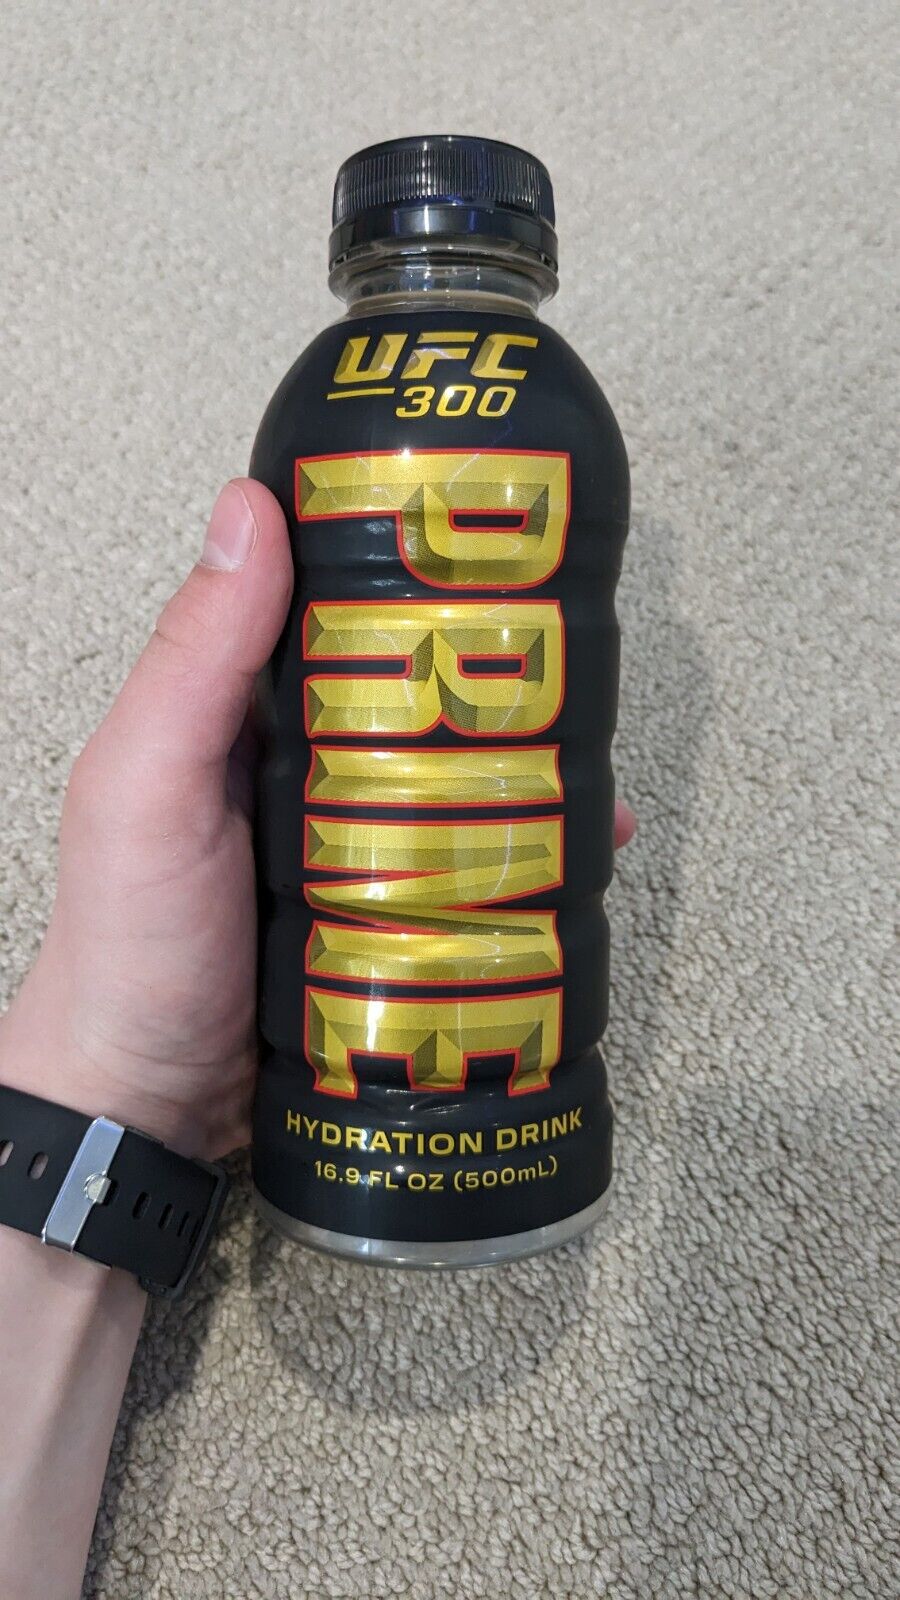 🔥 Prime Hydration UFC 300 Limited Edition Drink UNRELEASED Same Day Shipping 🔥